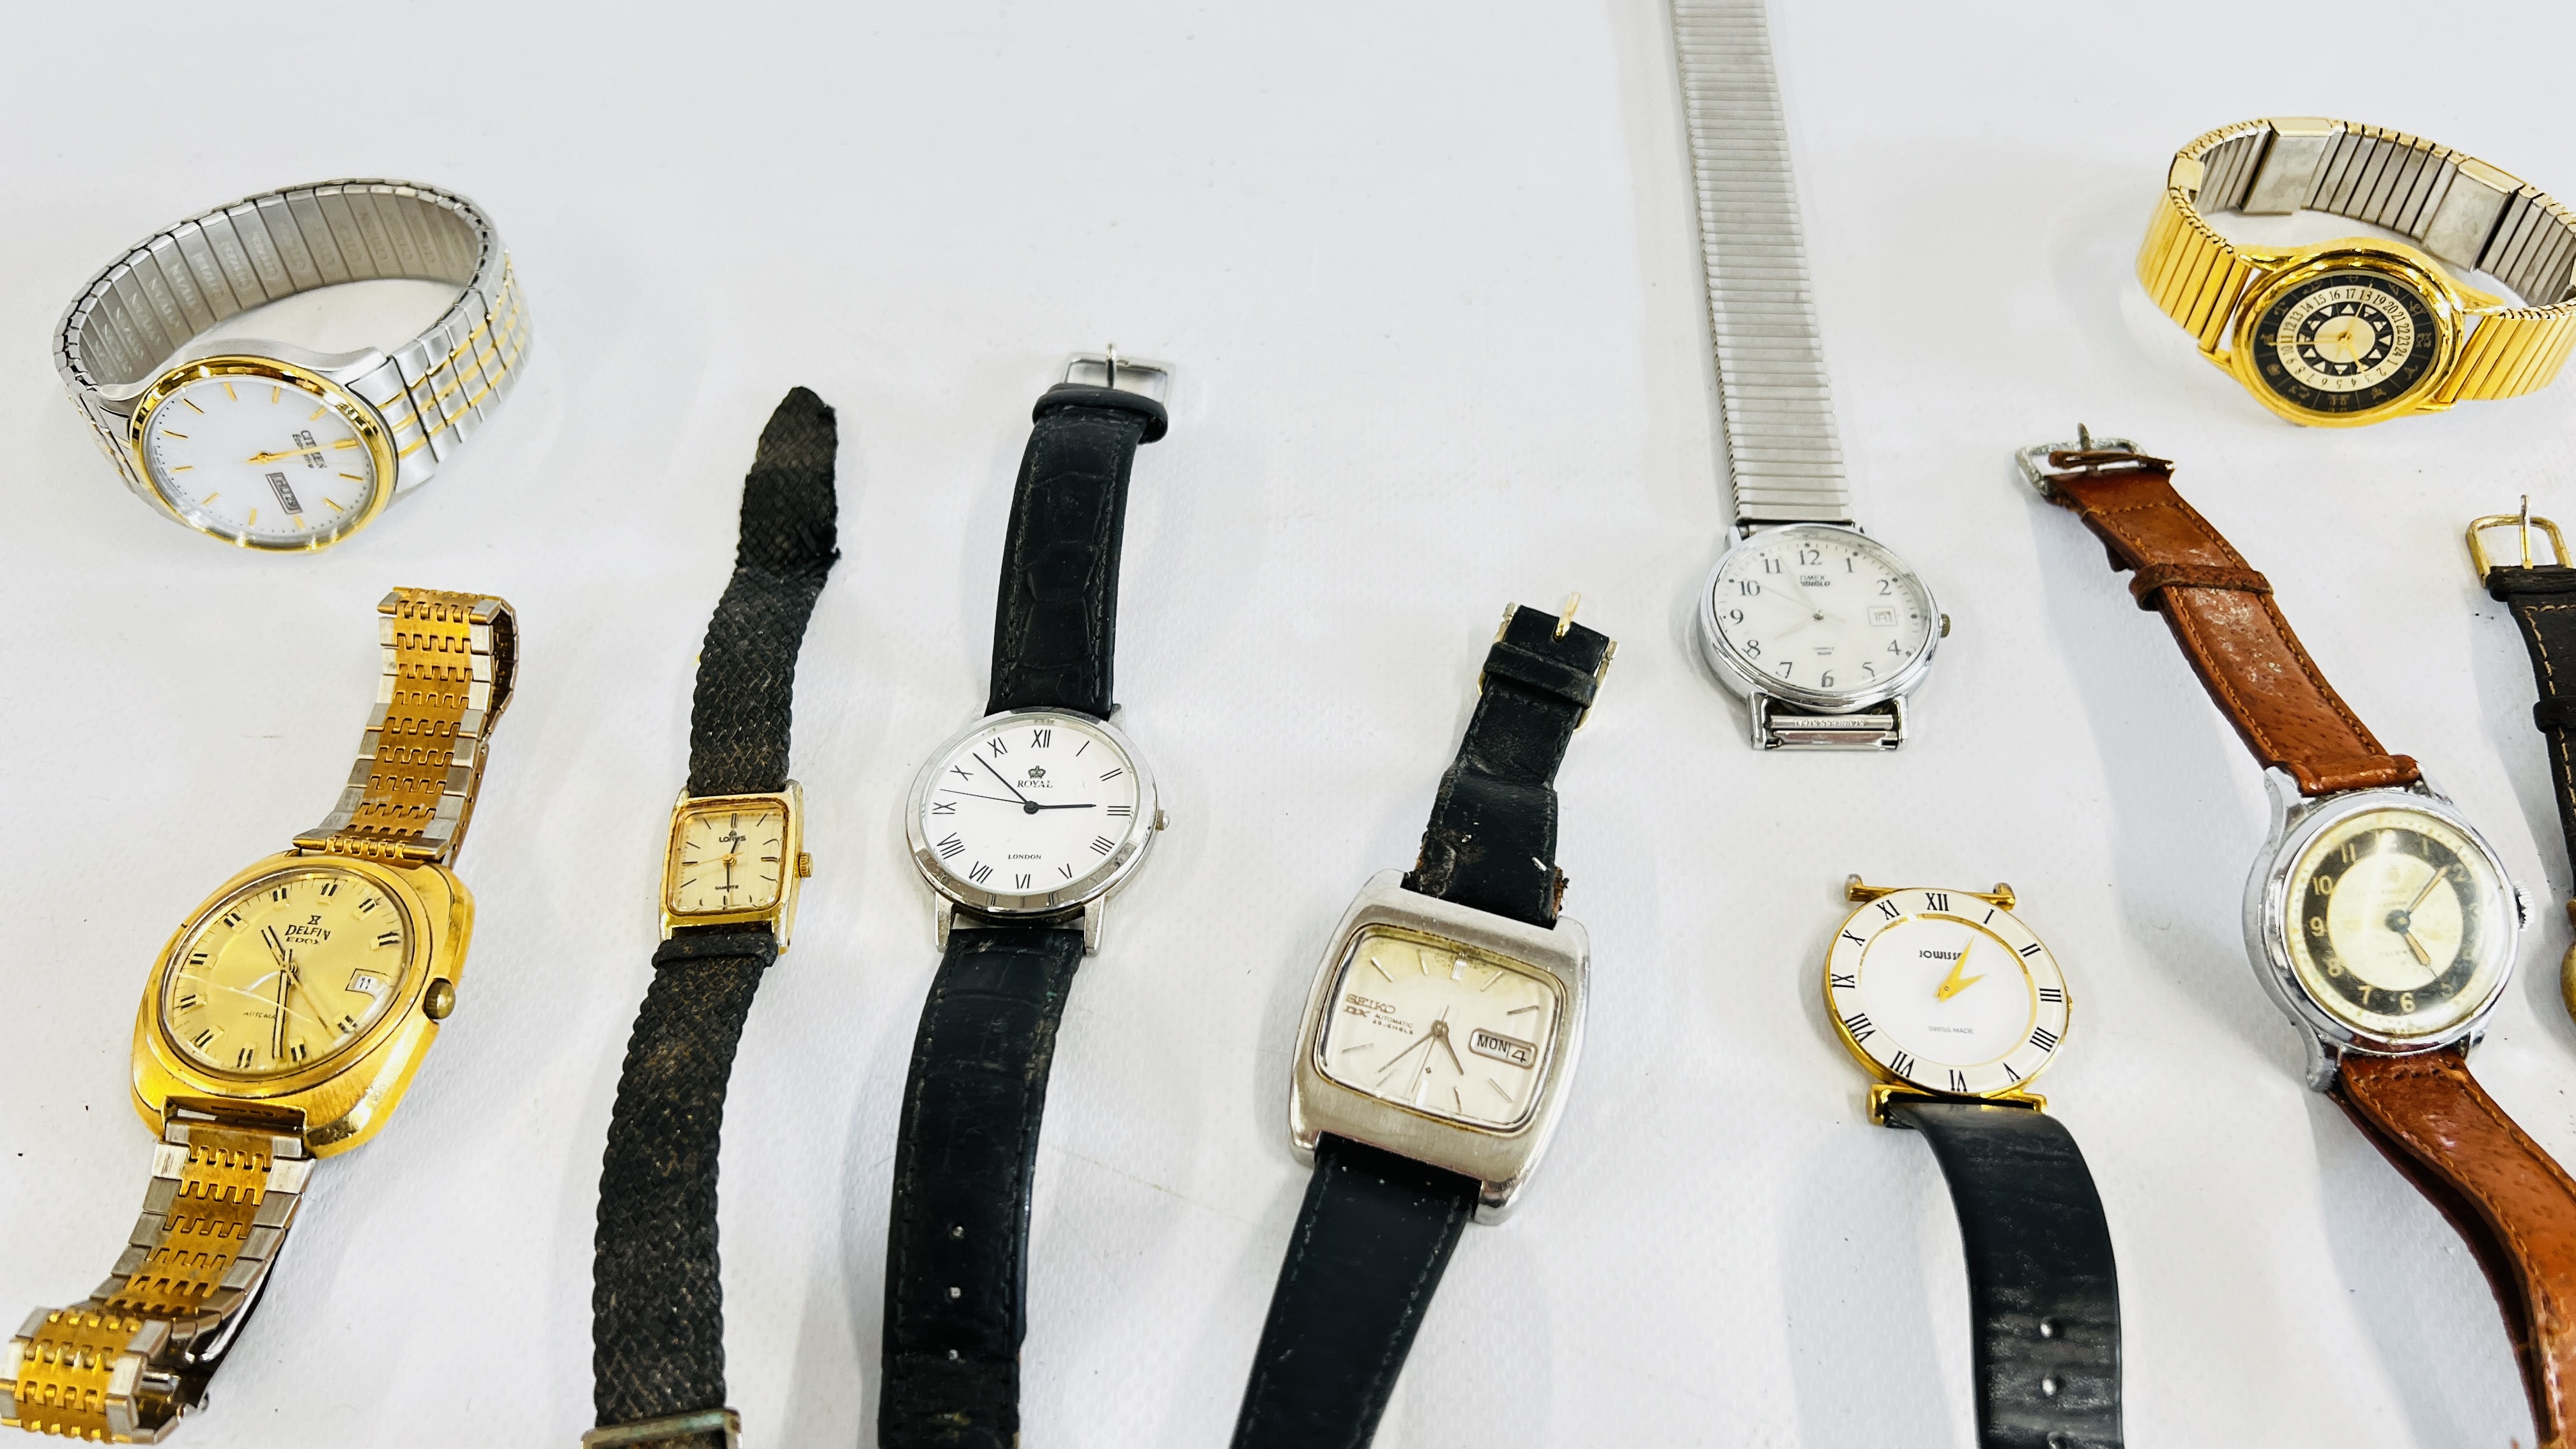 GROUP OF 17 GENT'S WRIST WATCHES TO INCLUDE SEIKO, SEKONDA, CITIZEN ECO DRIVE ETC. - Image 4 of 4